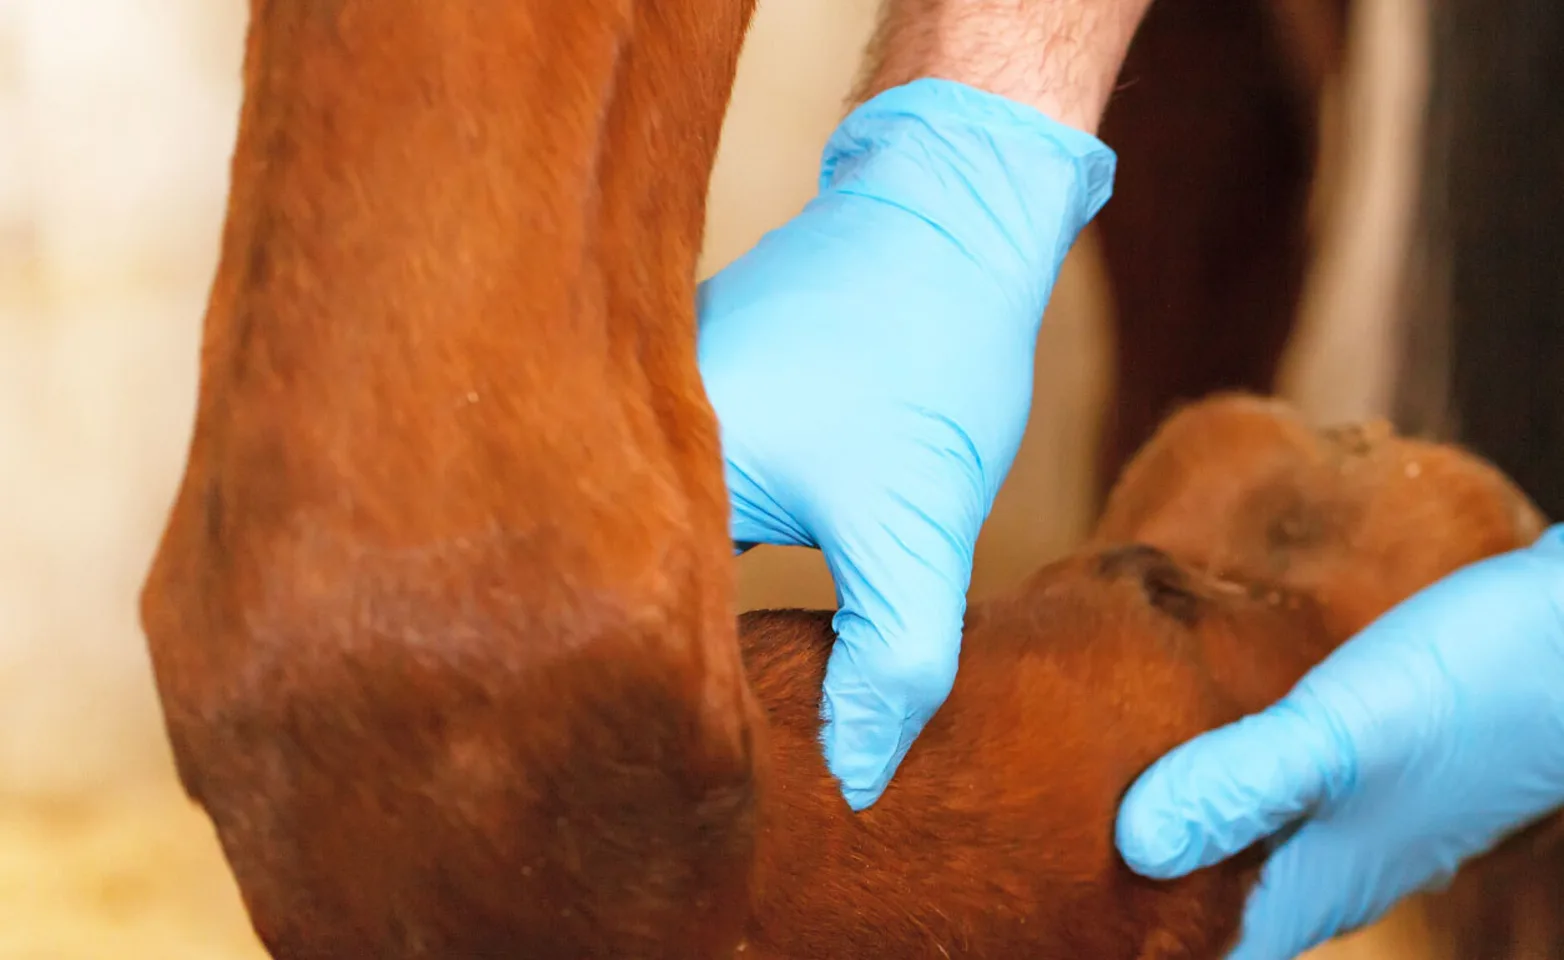 Horse leg joints being massaged by veterinarian's hands